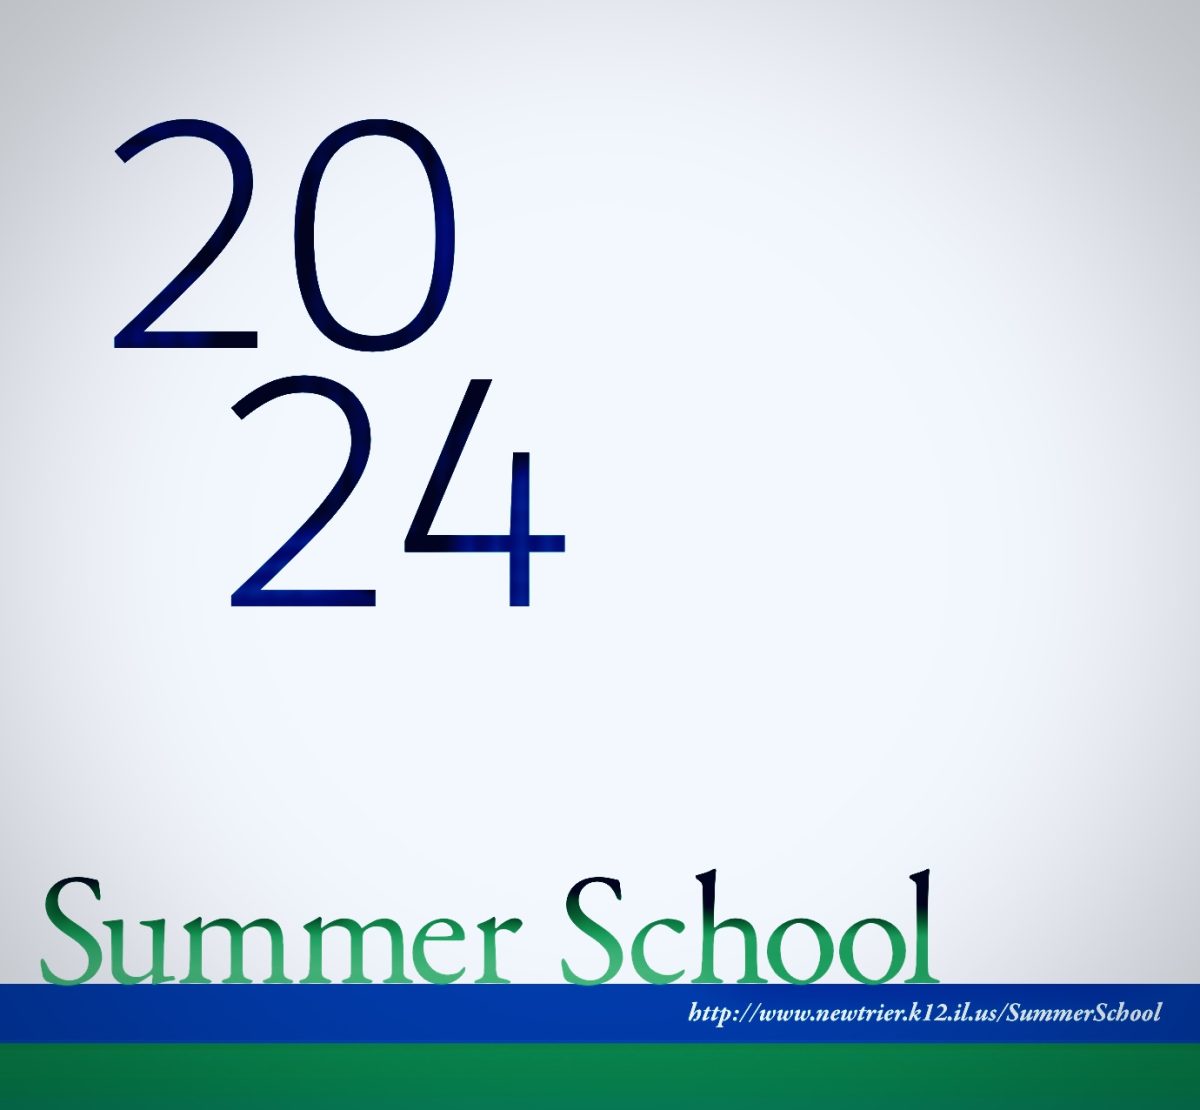 The summer school brochure for the 2024 summer session.